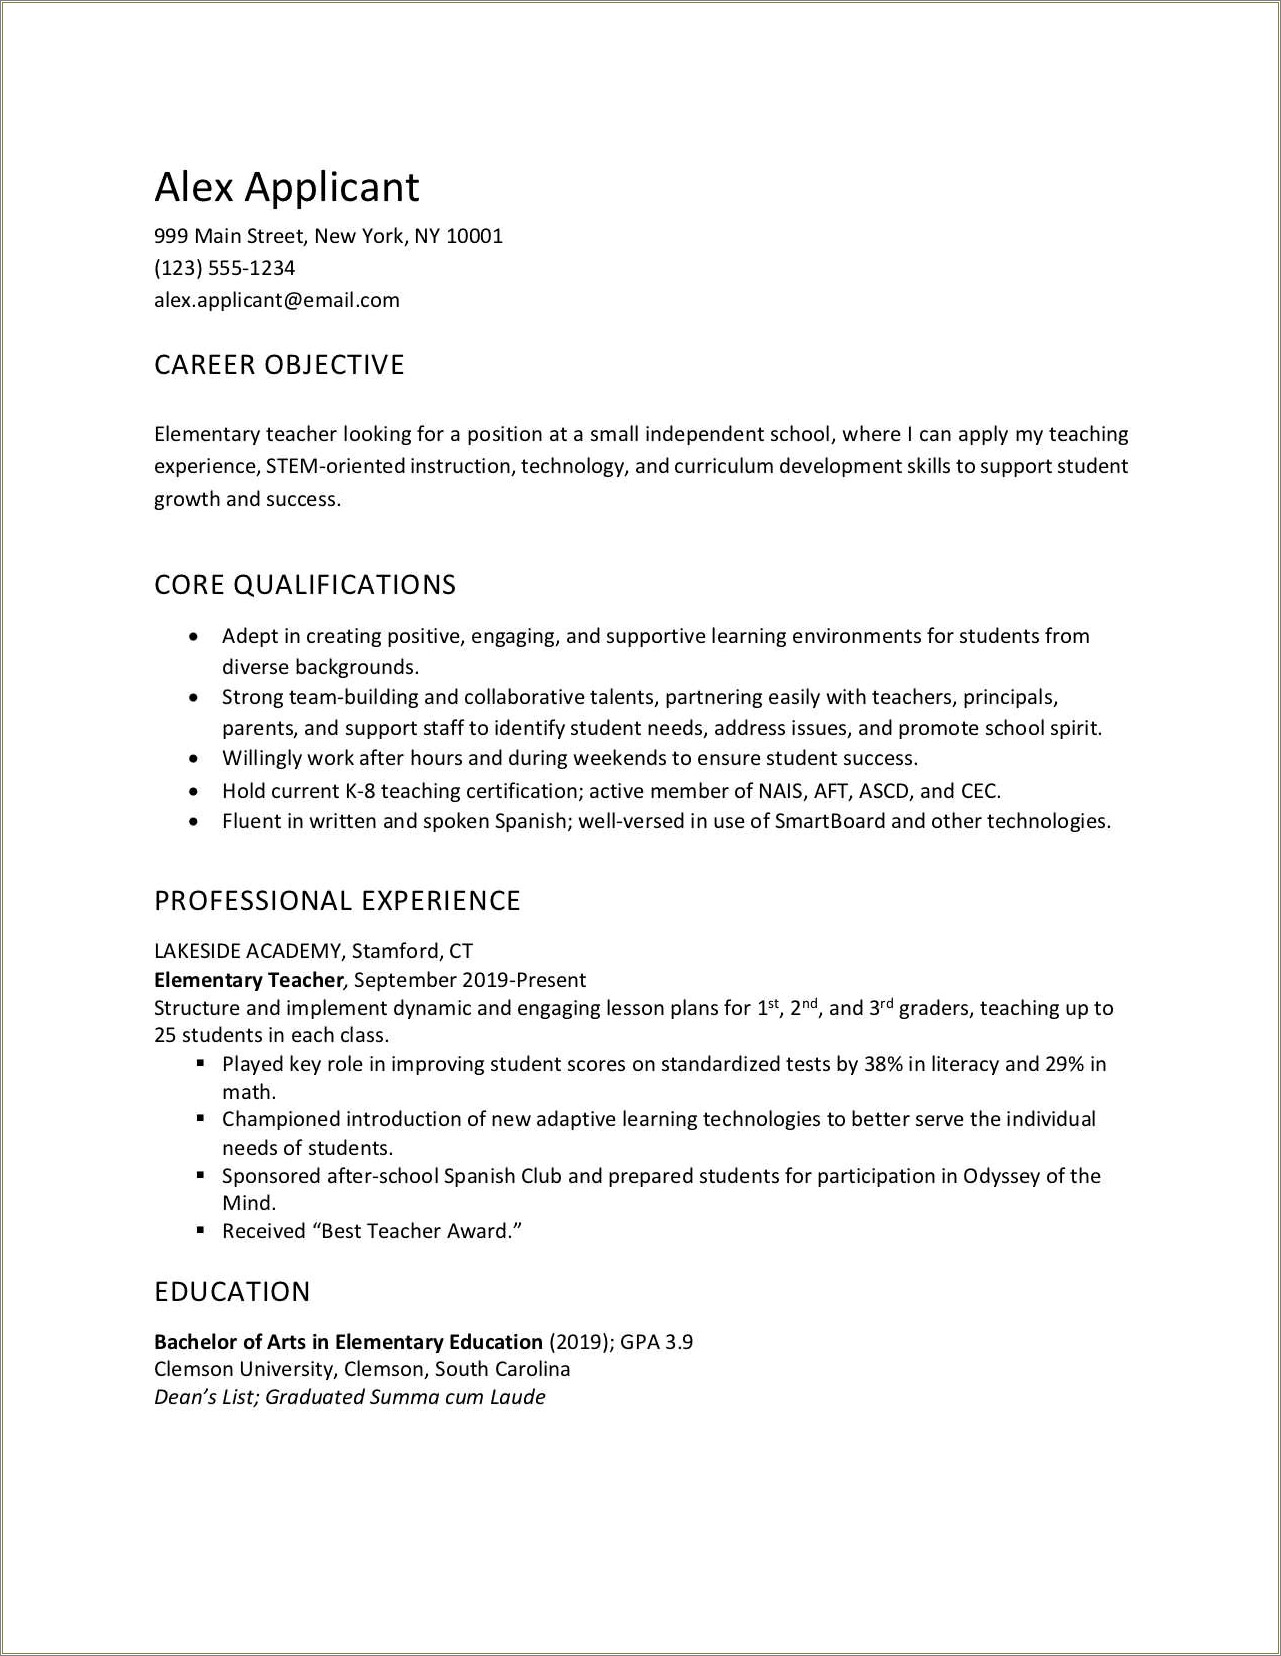 resume with opening statement